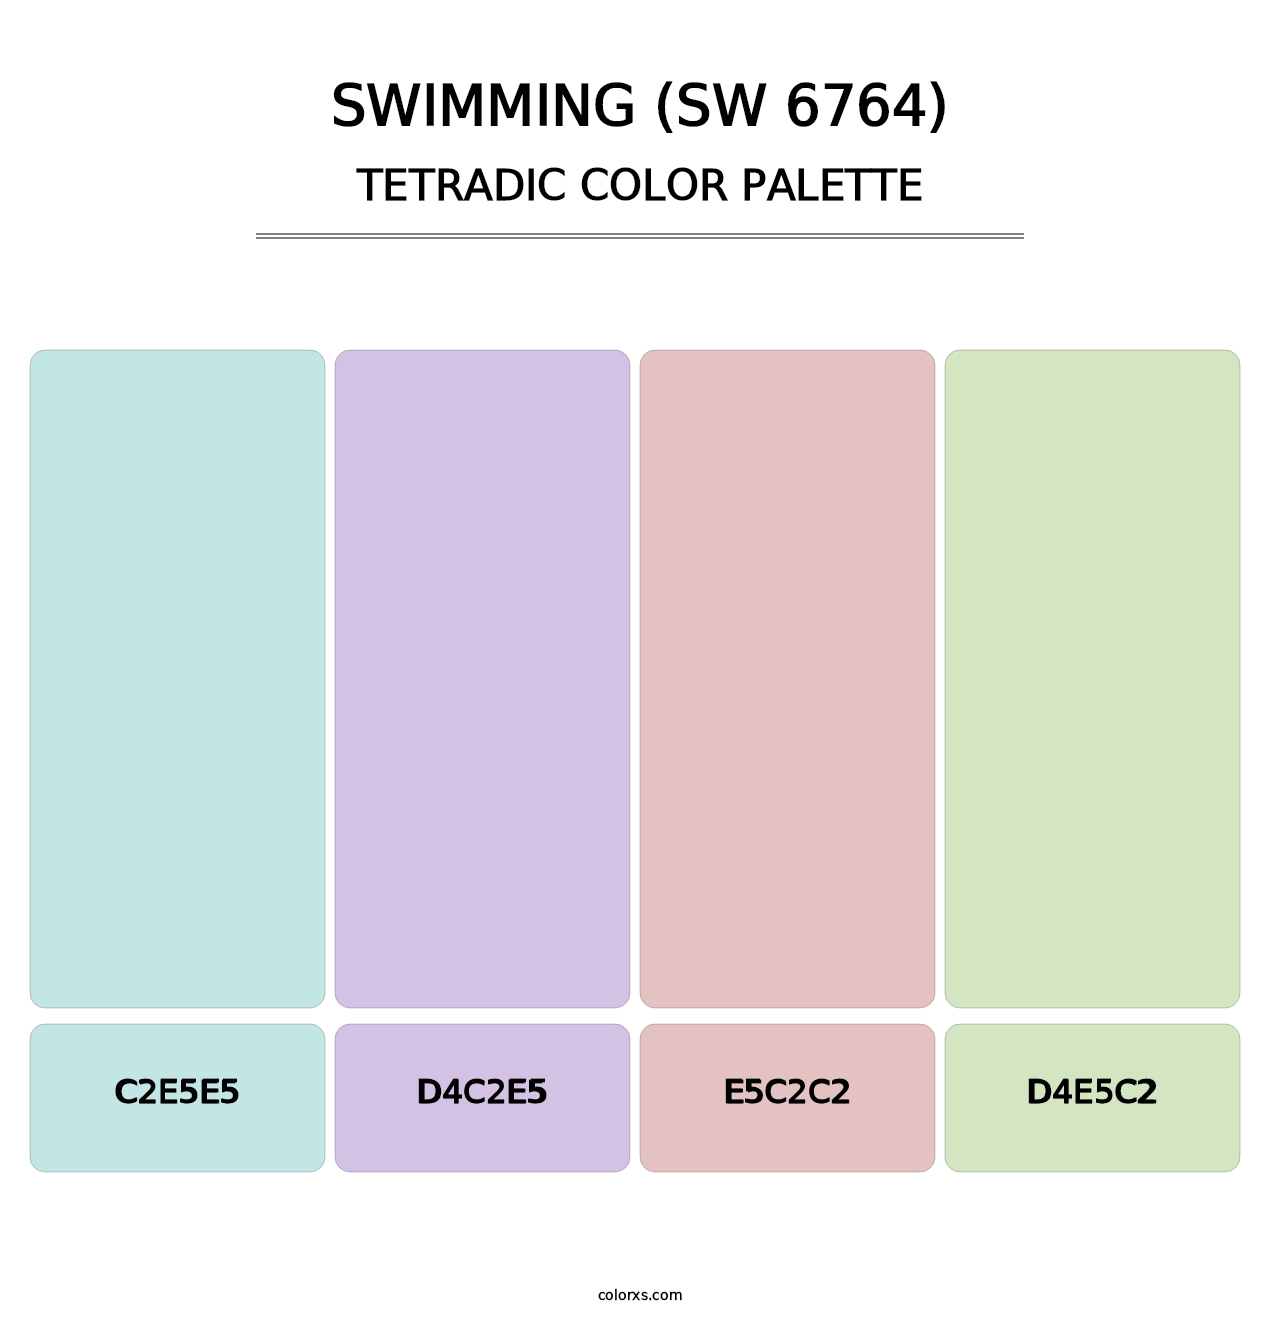 Swimming (SW 6764) - Tetradic Color Palette